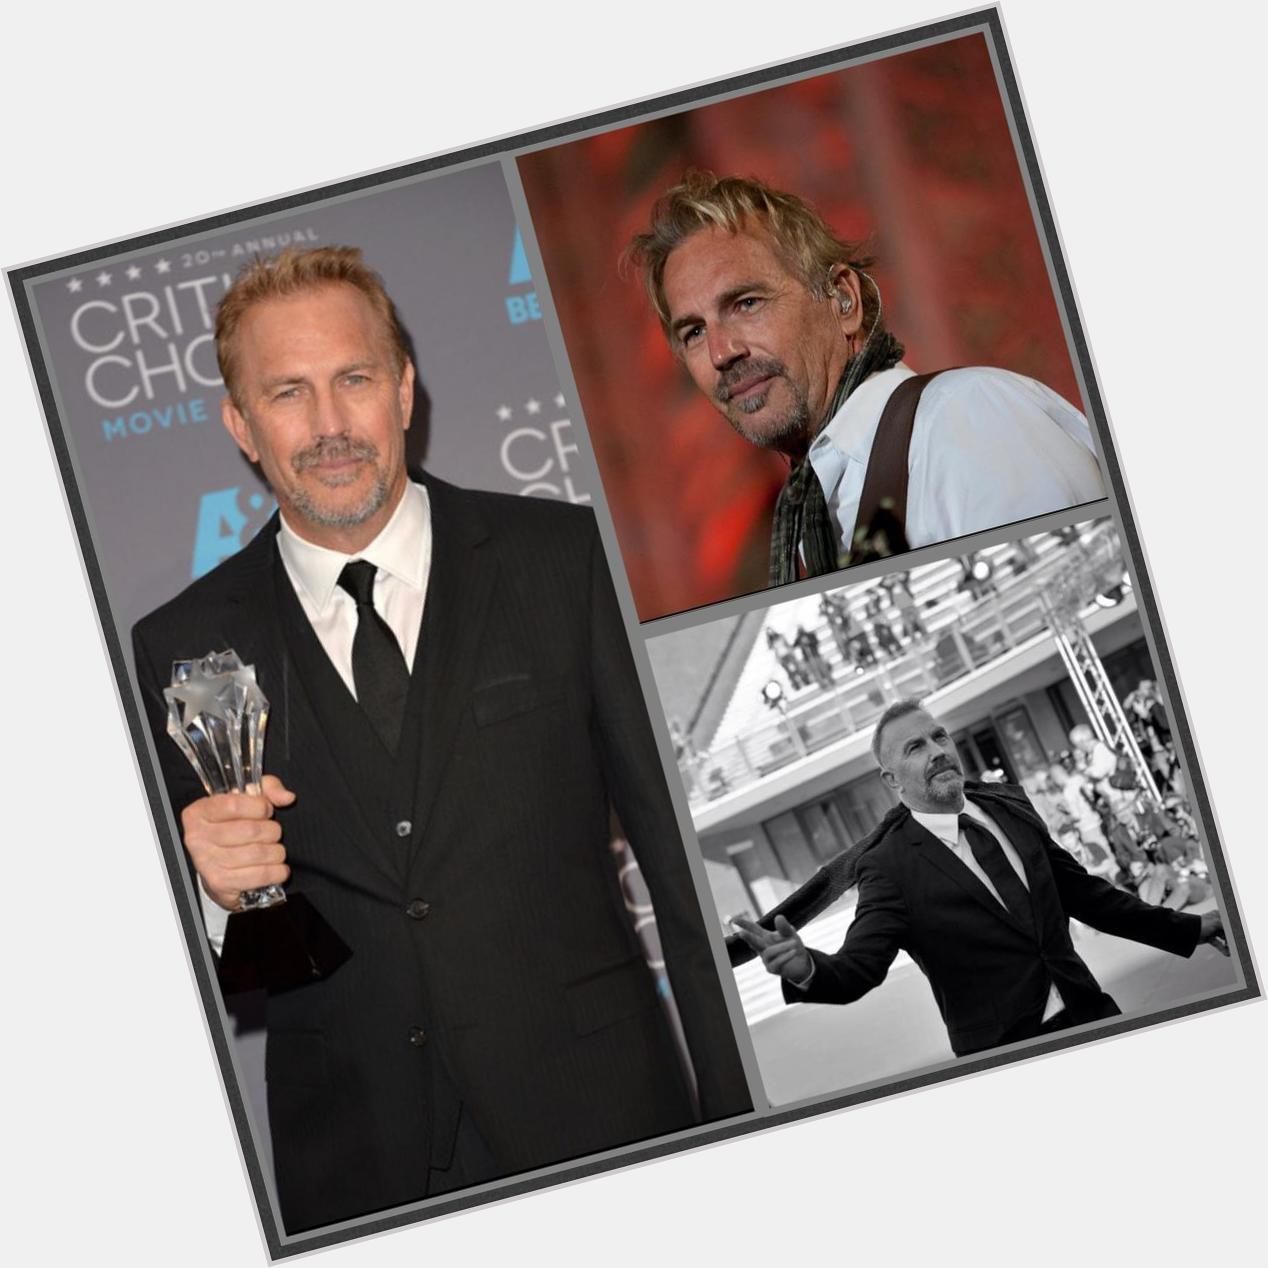  Happy Birthday Kevin Costner have a nice day with all family and friends. My best wishes from Italy.   